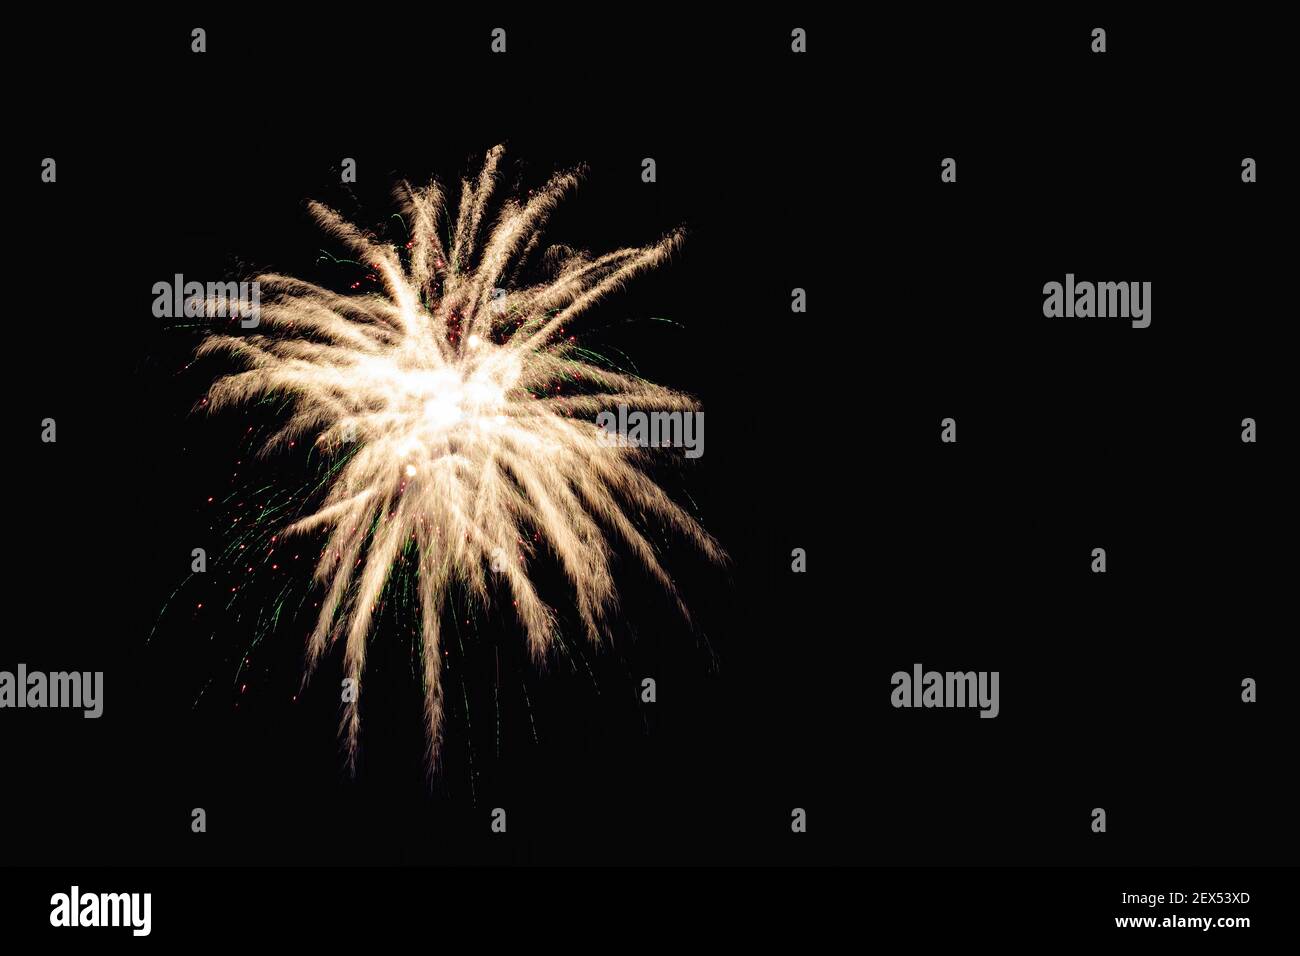 Image with a black background prepared to edit text of a firework, formed by a star with several branches of raw white color accompanied by traces and Stock Photo